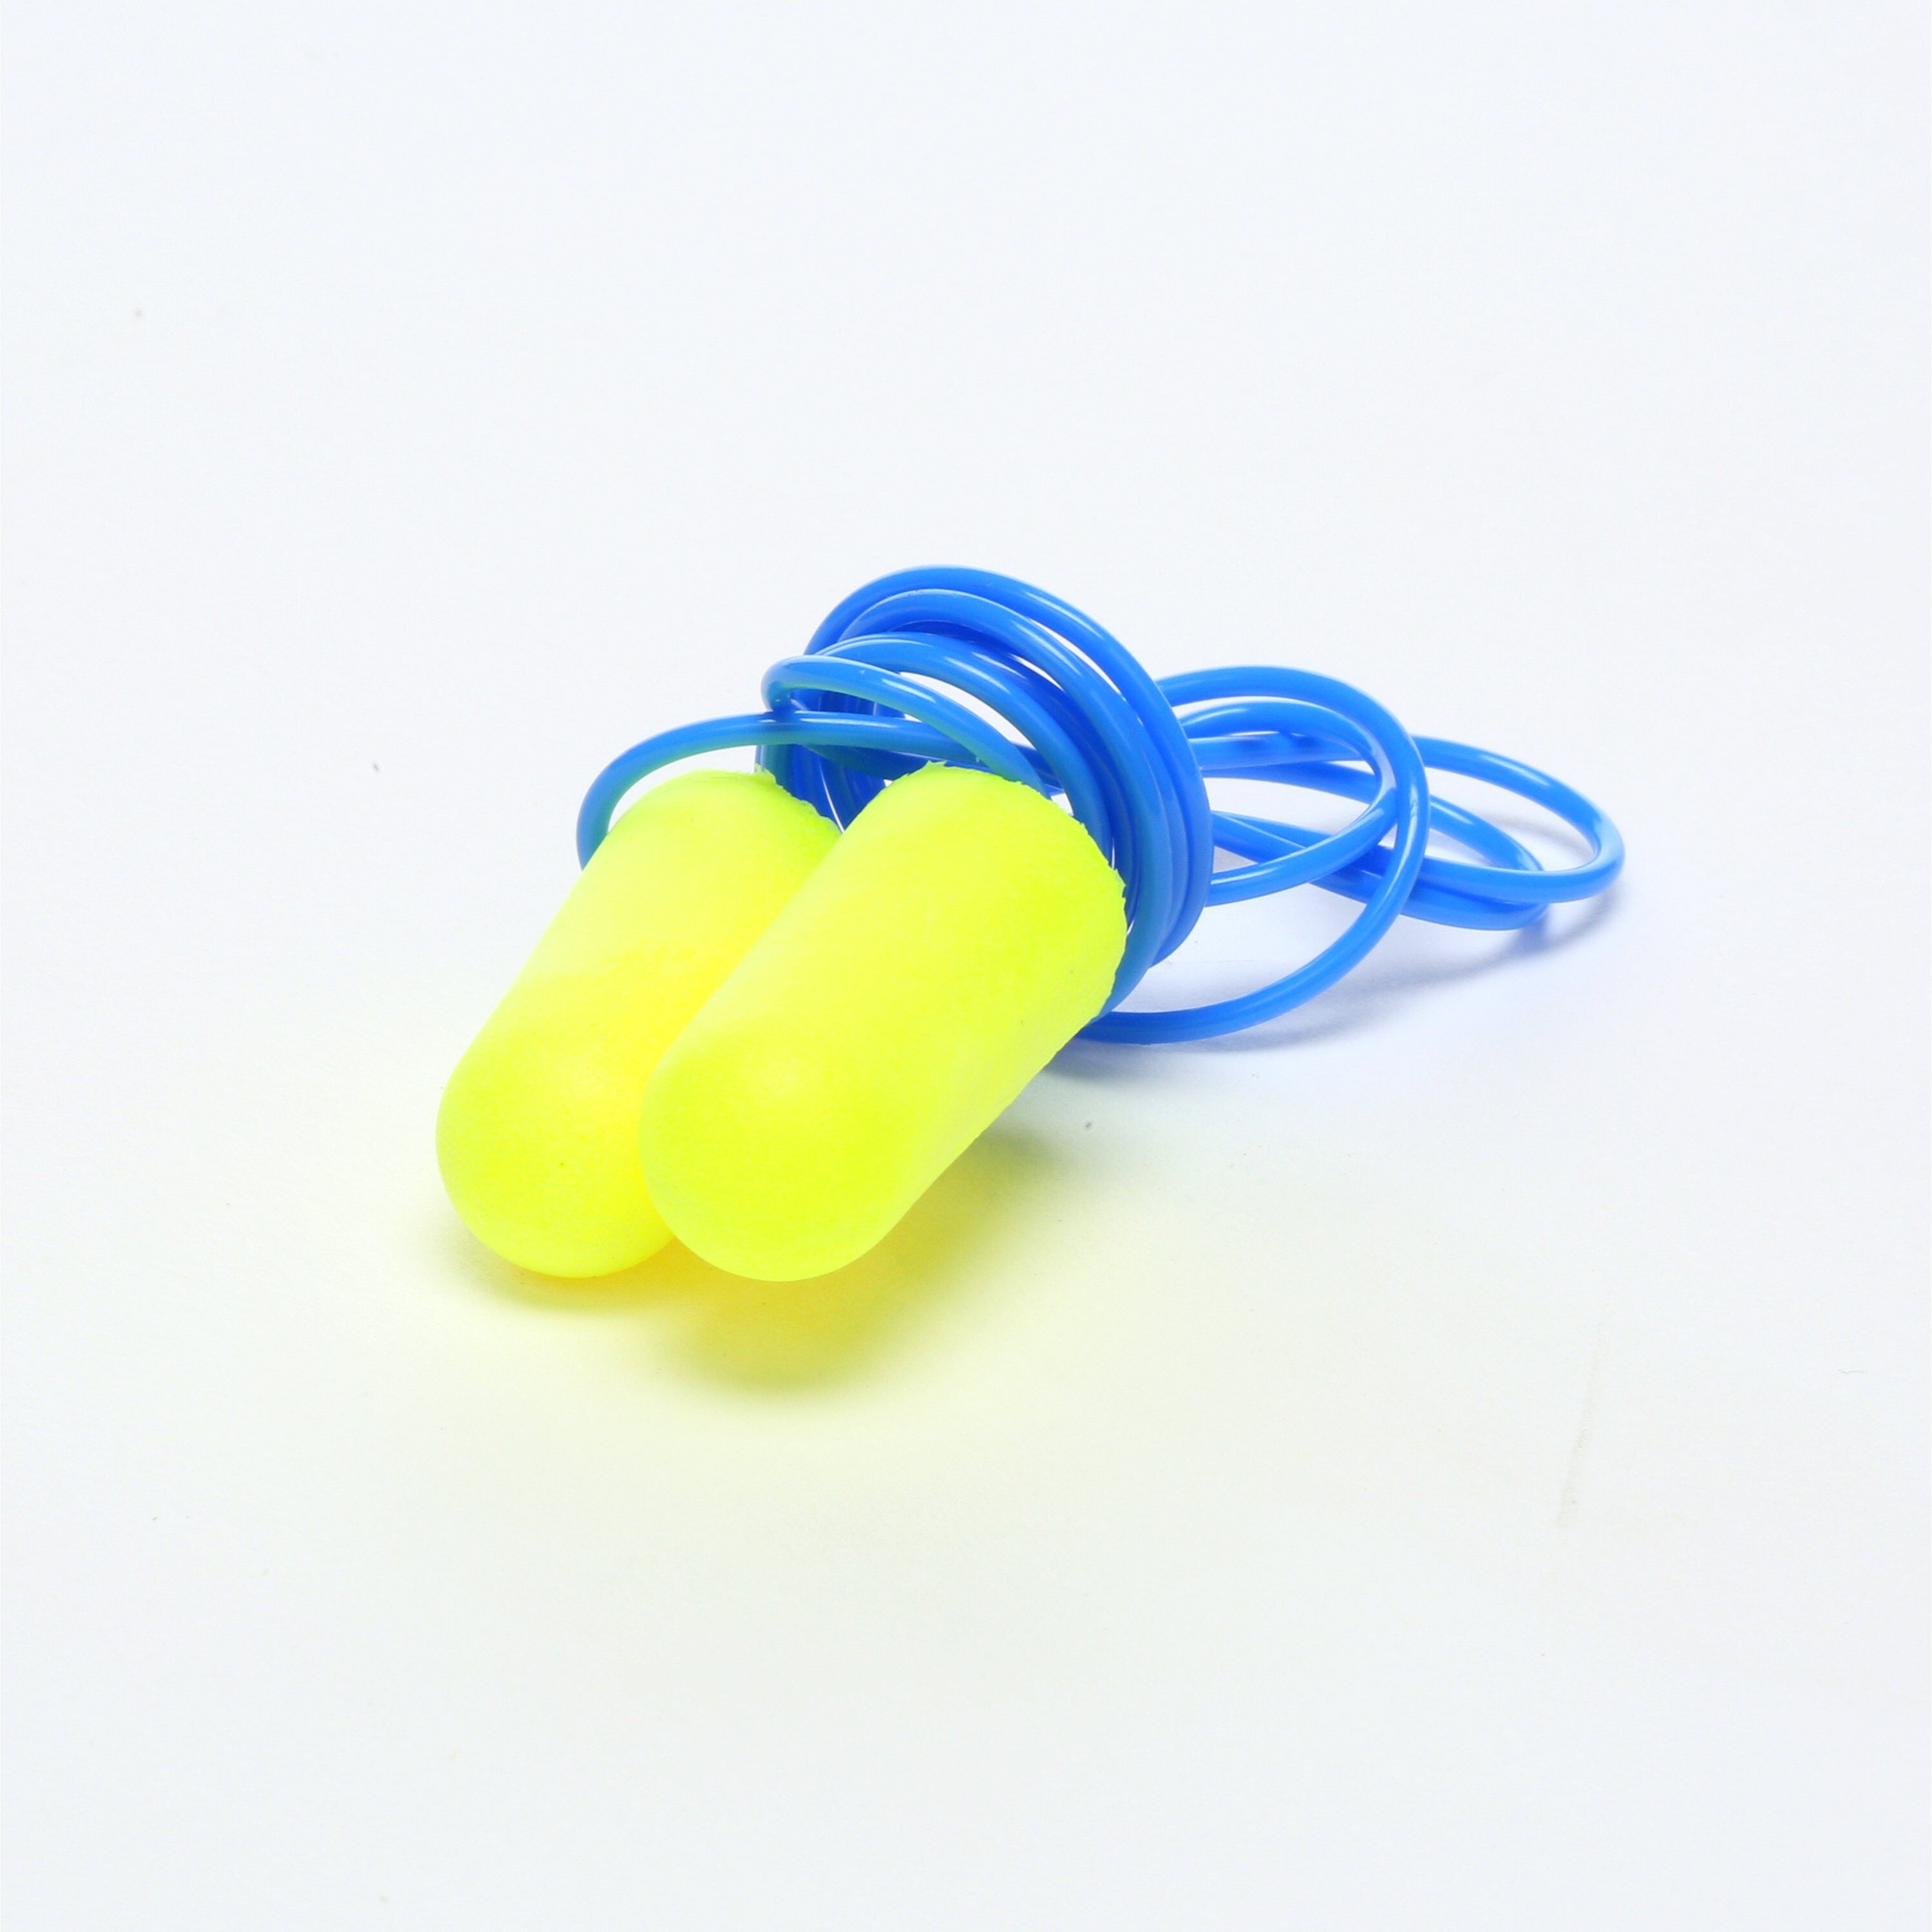 E-A-Rsoft™ 311-1250 Neons™ Earplugs, 33 dB Noise Reduction, Tapered Shape, CSA Class AL, Disposable, Corded Design